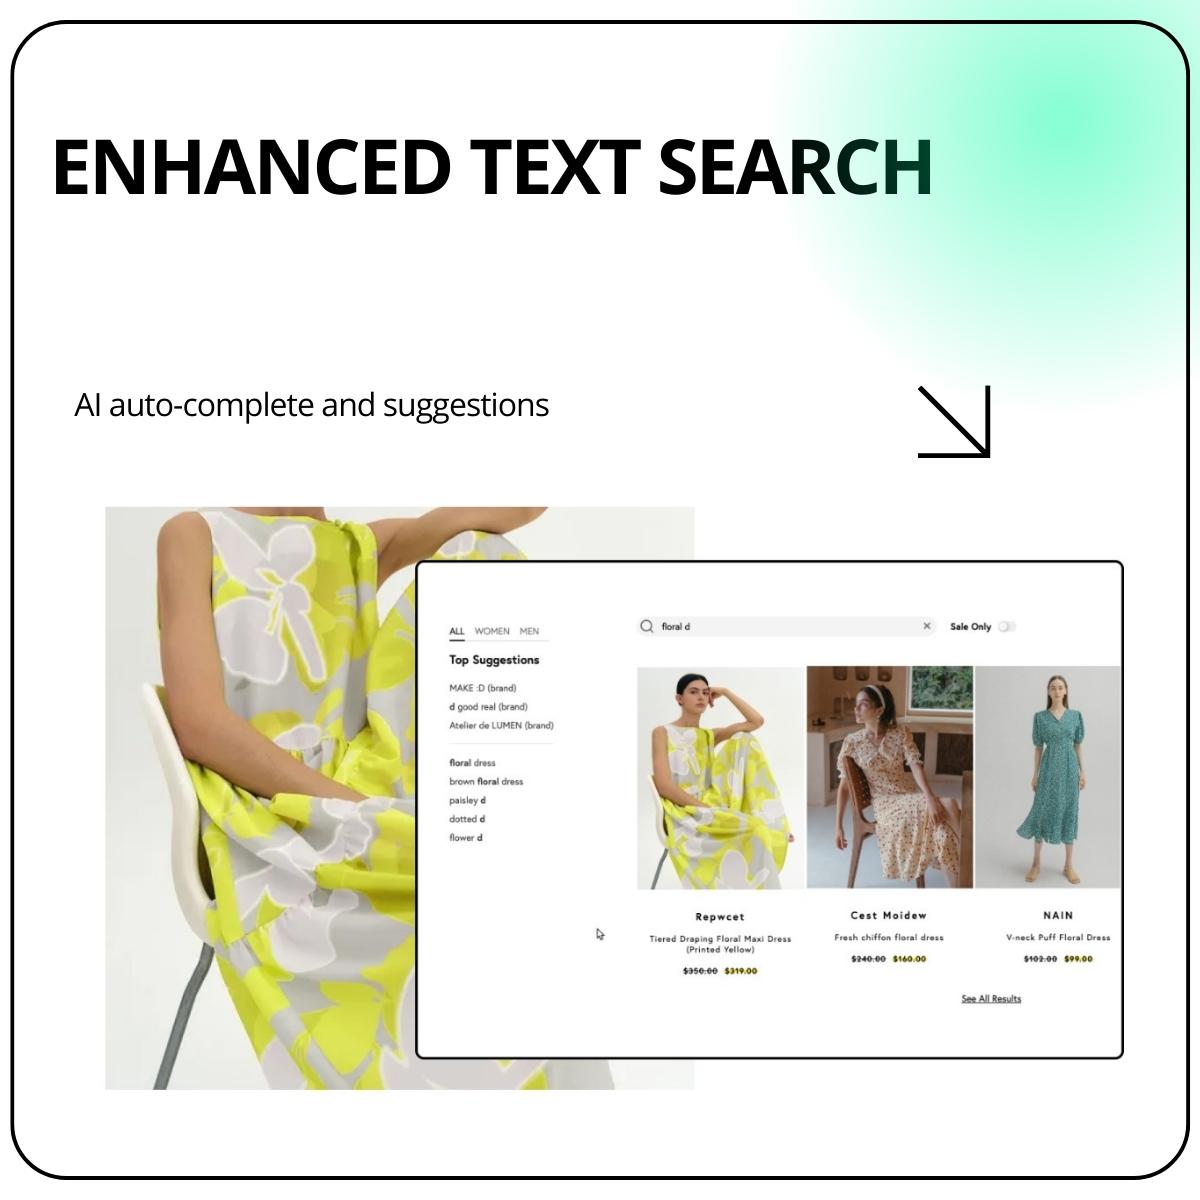 Enhanced text search example using AI for W Concept